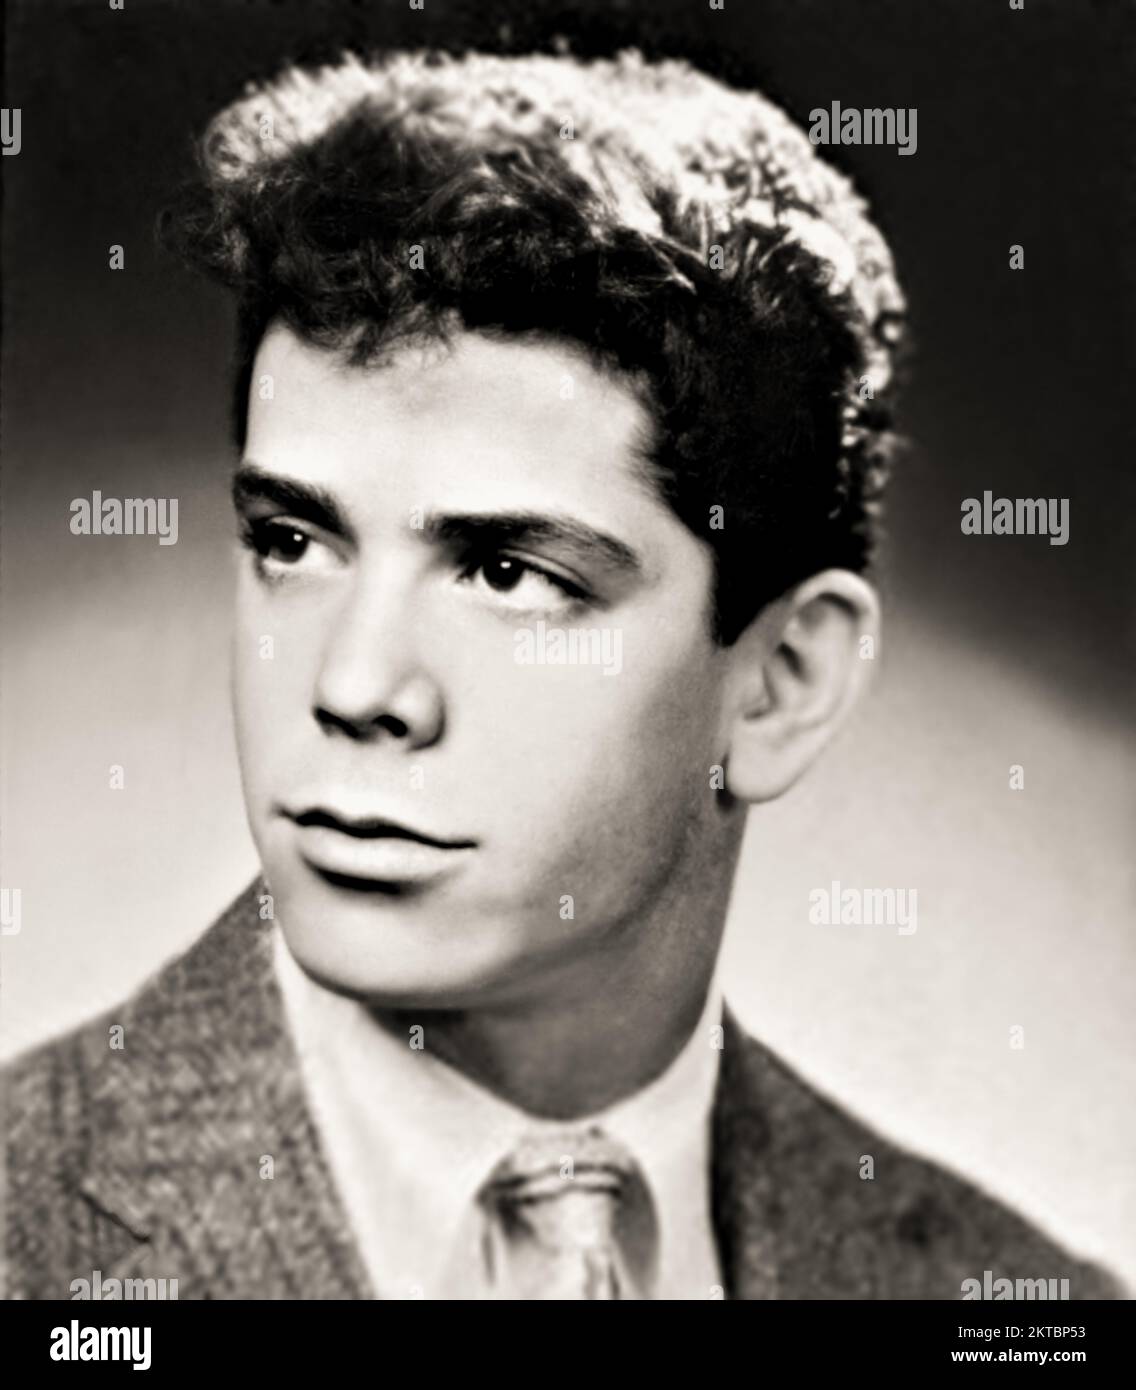 1959 , New York , USA : The celebrated american Rock Star singer LOU REED ( Lewis Allan Reed , 1942 - 2013 ) when was a young boy aged 17 . Photo from the High School Yearbook . Unknown photographer. - HISTORY - FOTO STORICHE - personalità da giovane giovani - personality personalities when was young - INFANZIA - CHILDHOOD - POP MUSIC - MUSICA - cantante - ROCK STAR - TEENAGER - PORTRAIT - RITRATTO --- ARCHIVIO GBB Stock Photo